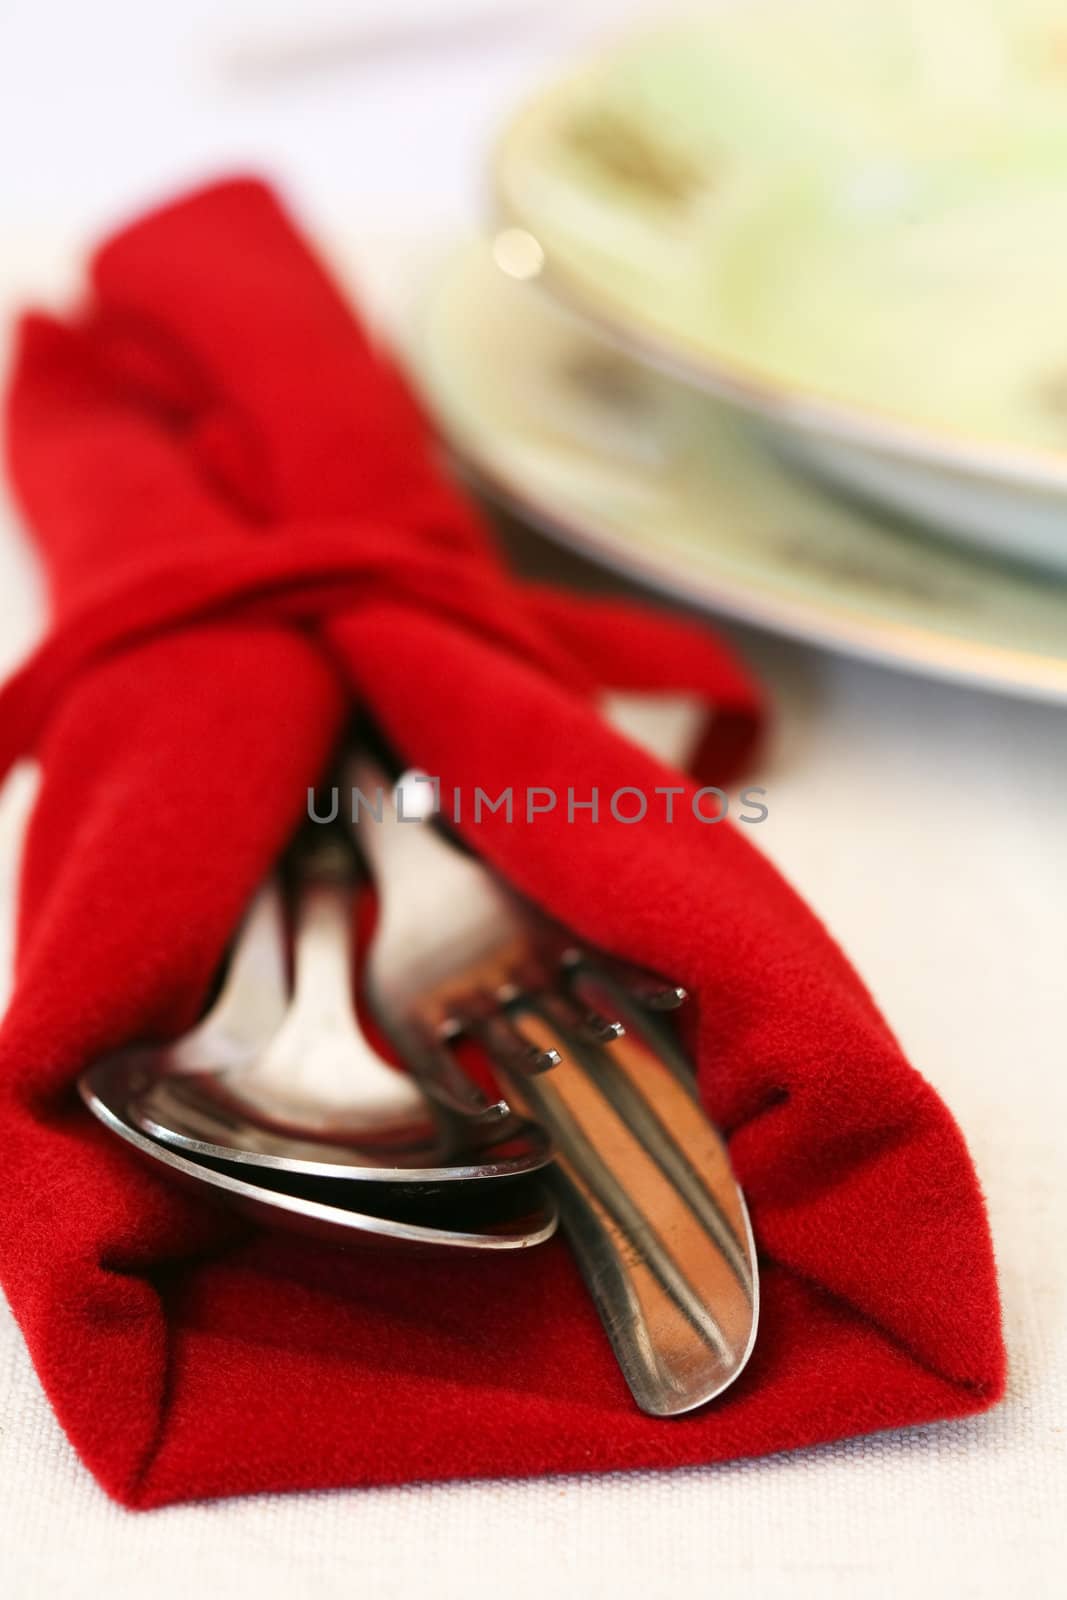 fork, knife and spoon on neutral background